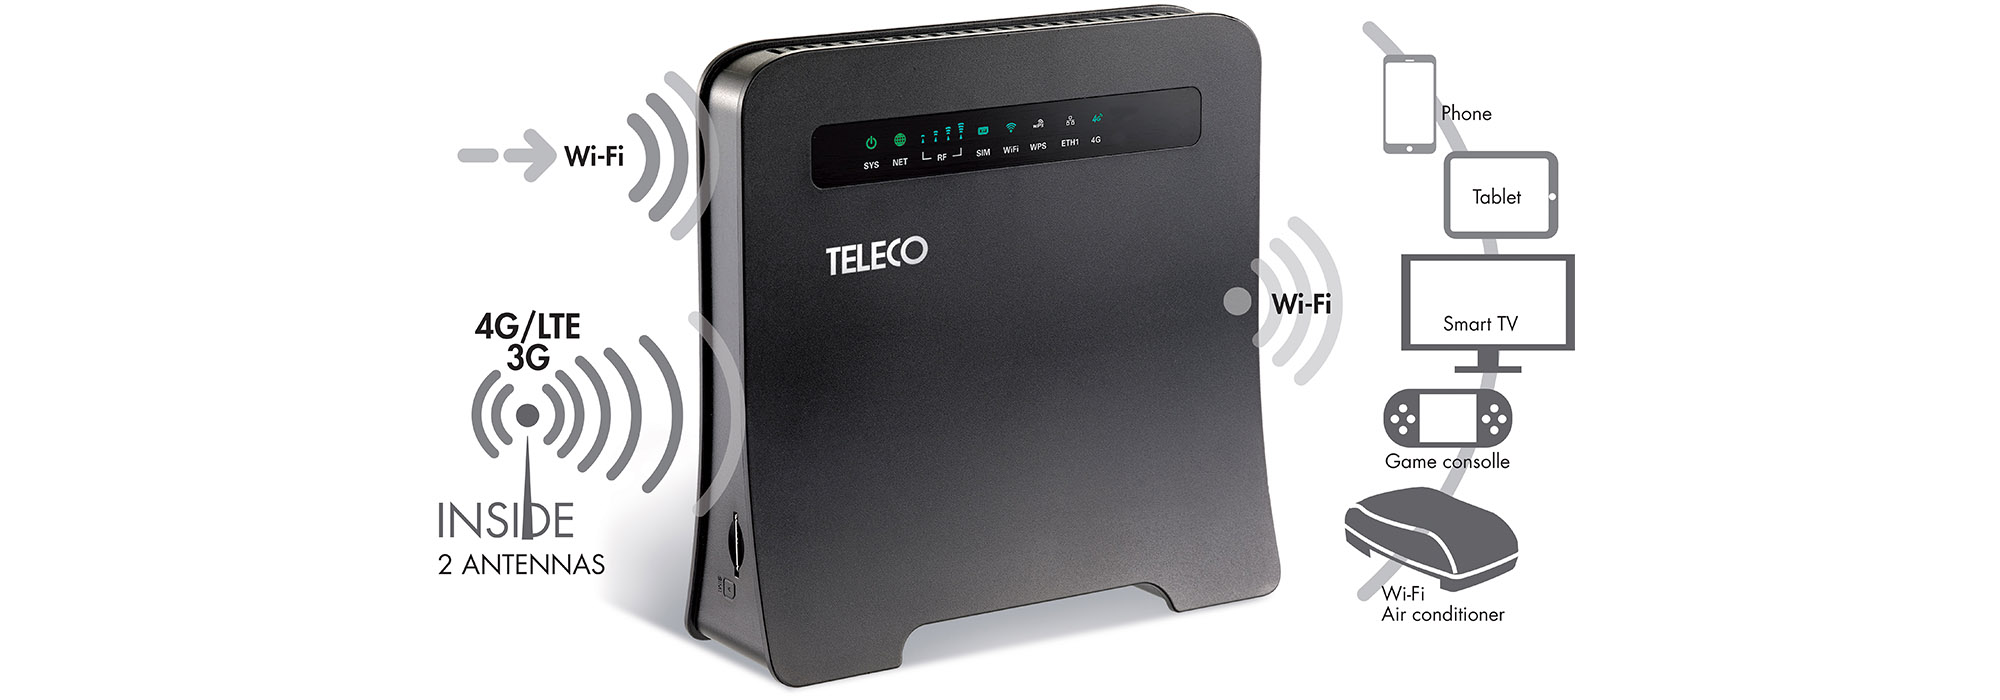 Teleco presents a router with mobile phone connection and Wi-Fi repeater